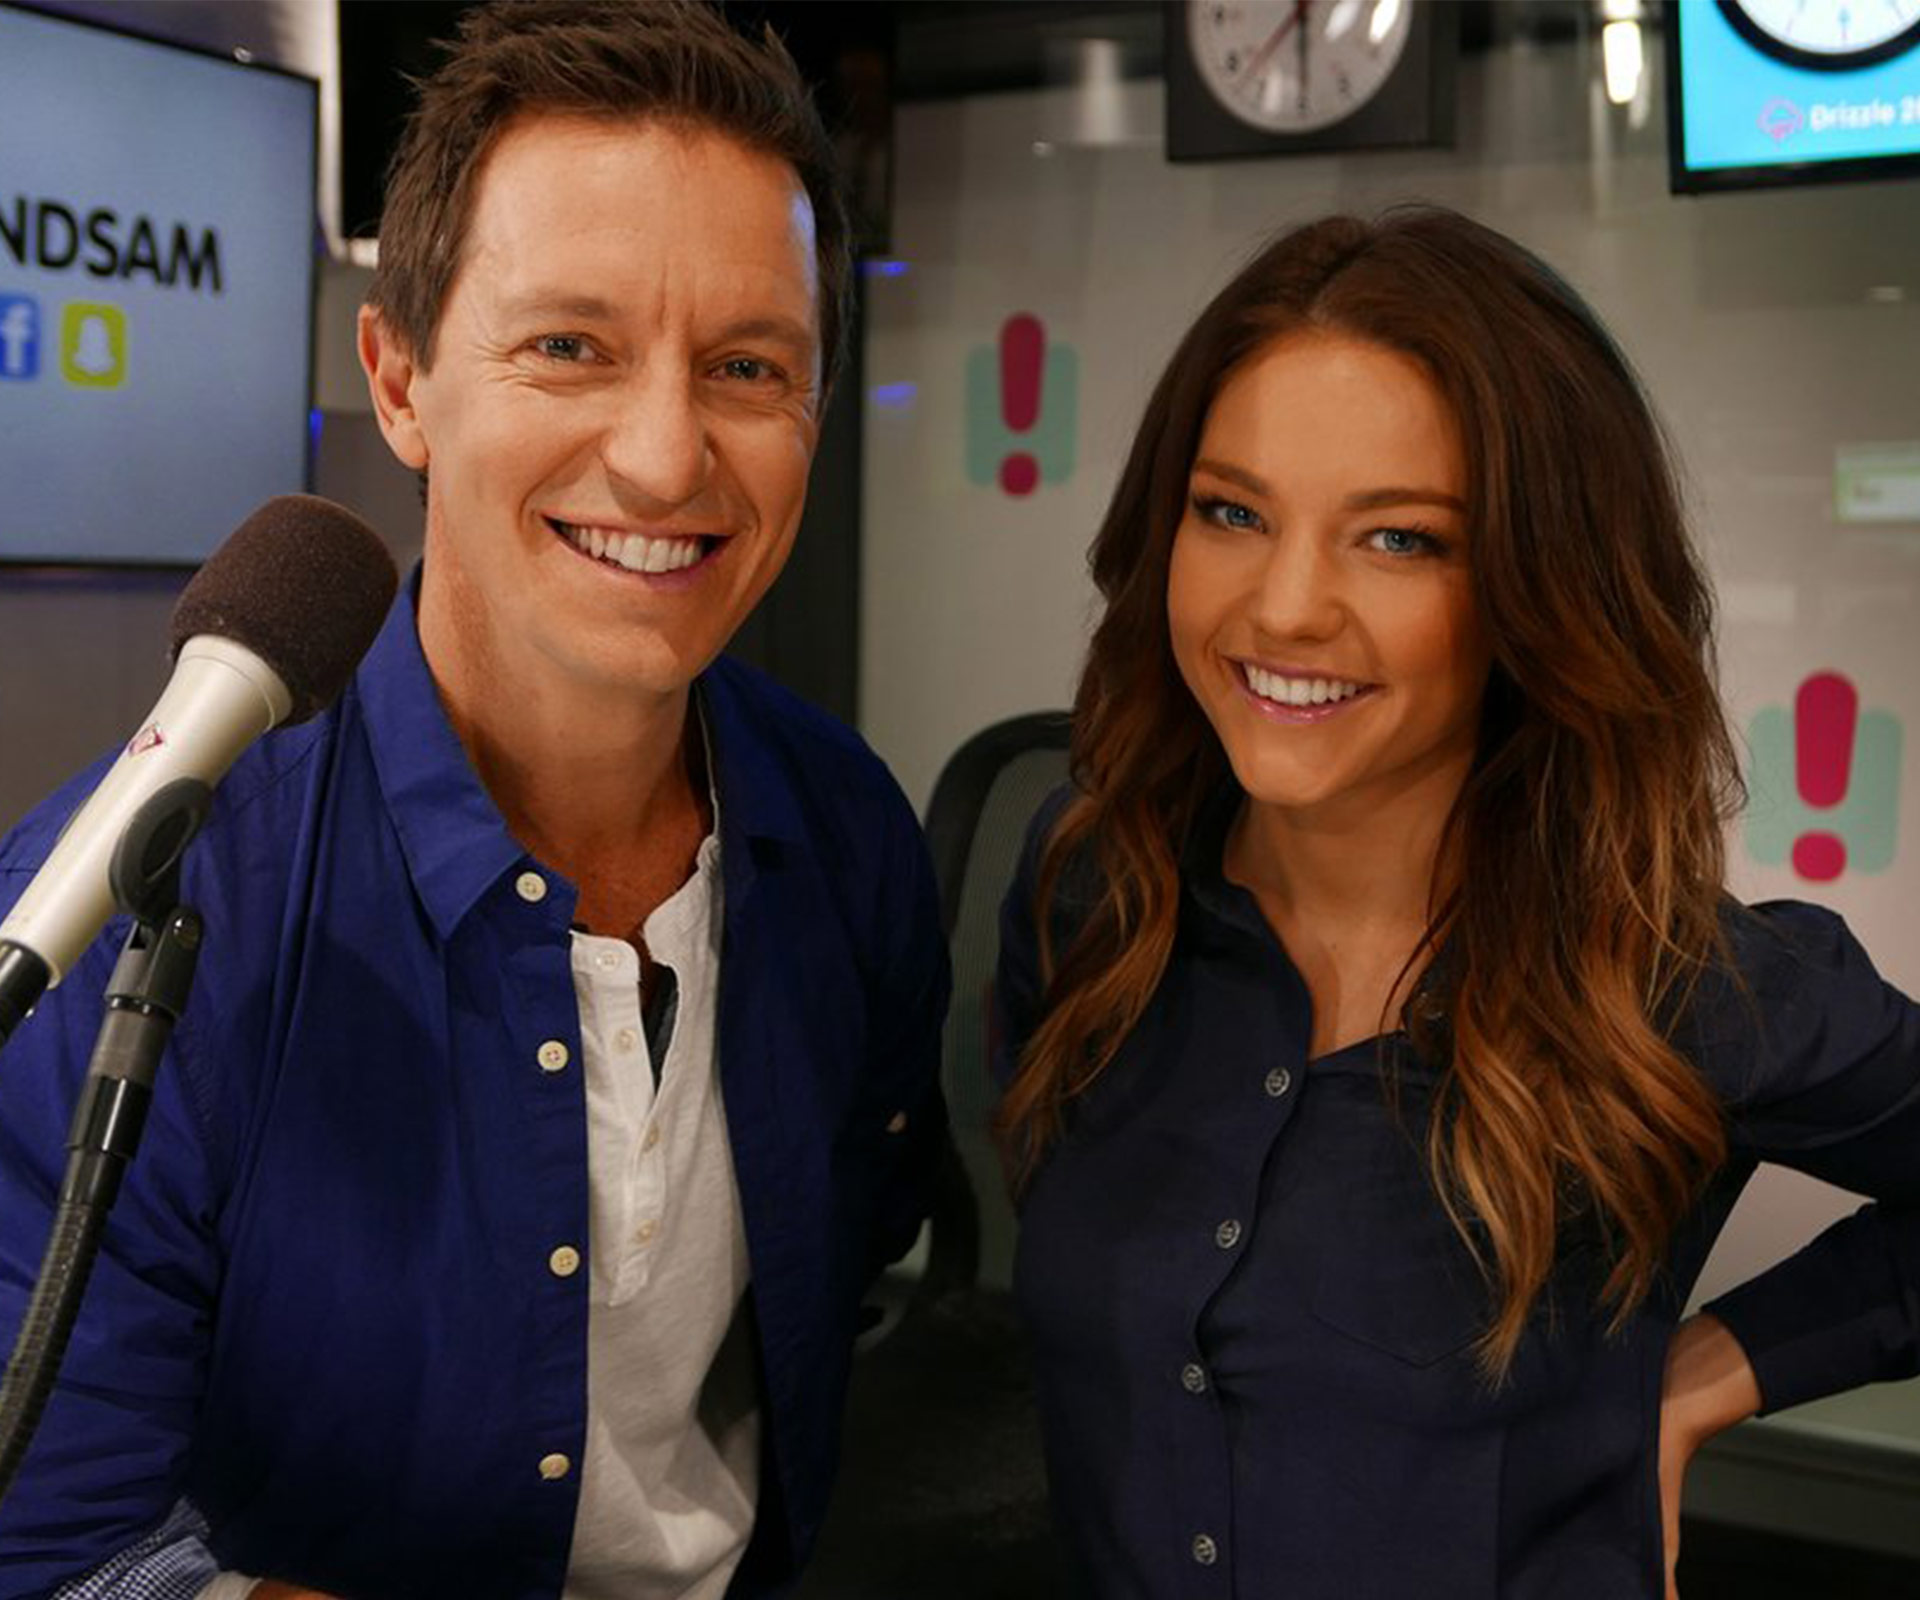 Sam and Rove have had their radio show axed